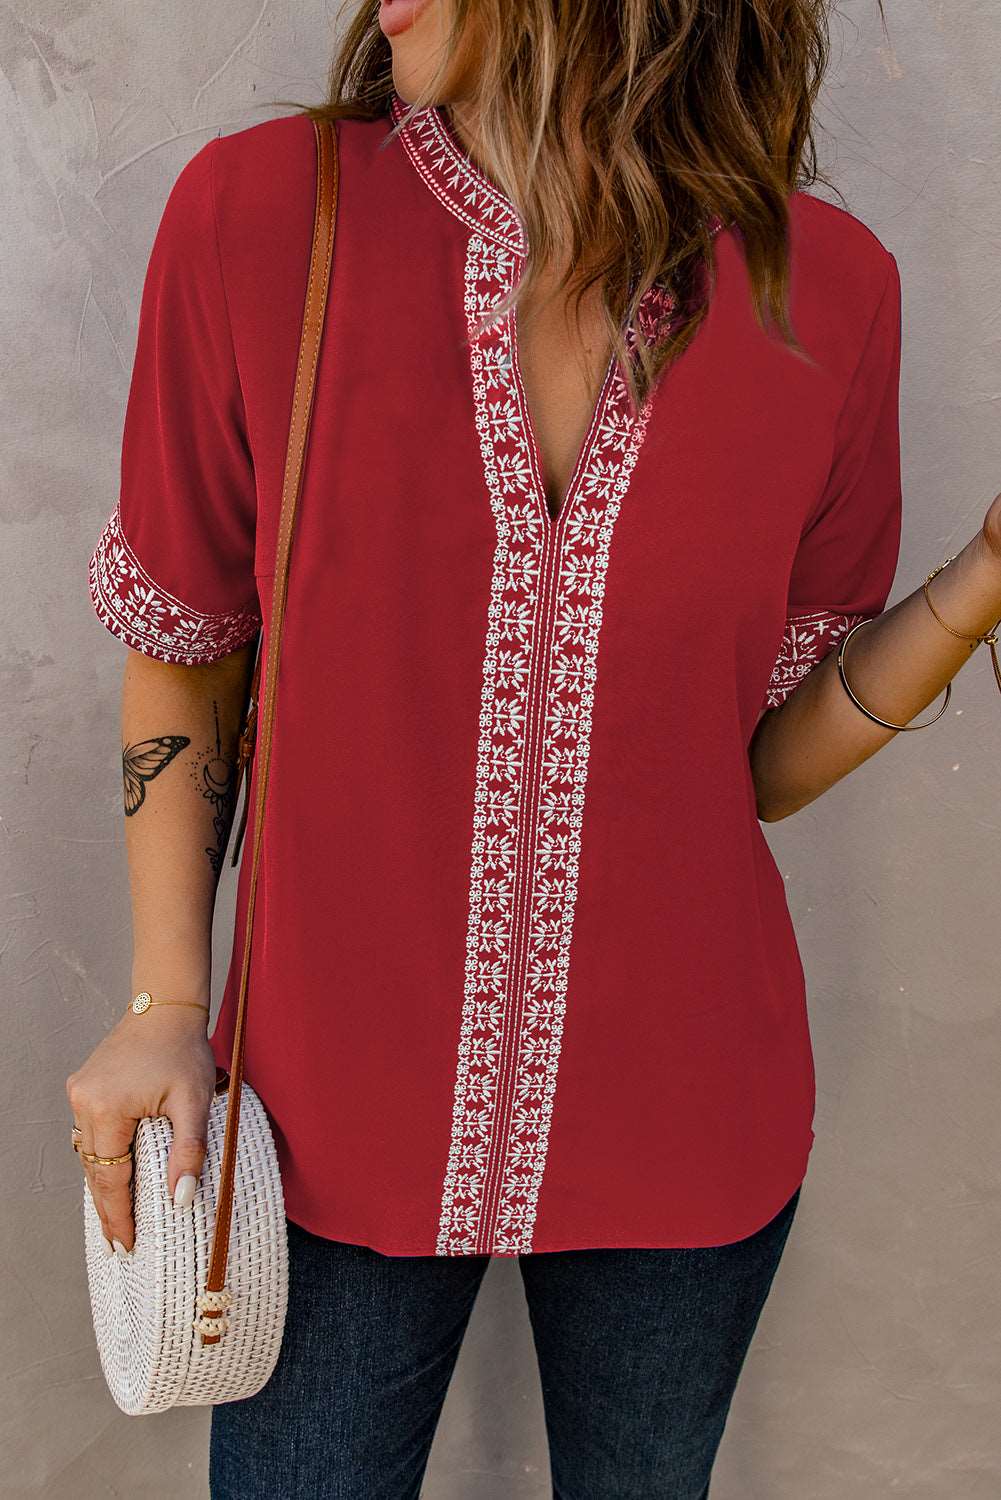 Embroidered V-Neck Top (3 Colors)  Krazy Heart Designs Boutique Red S 